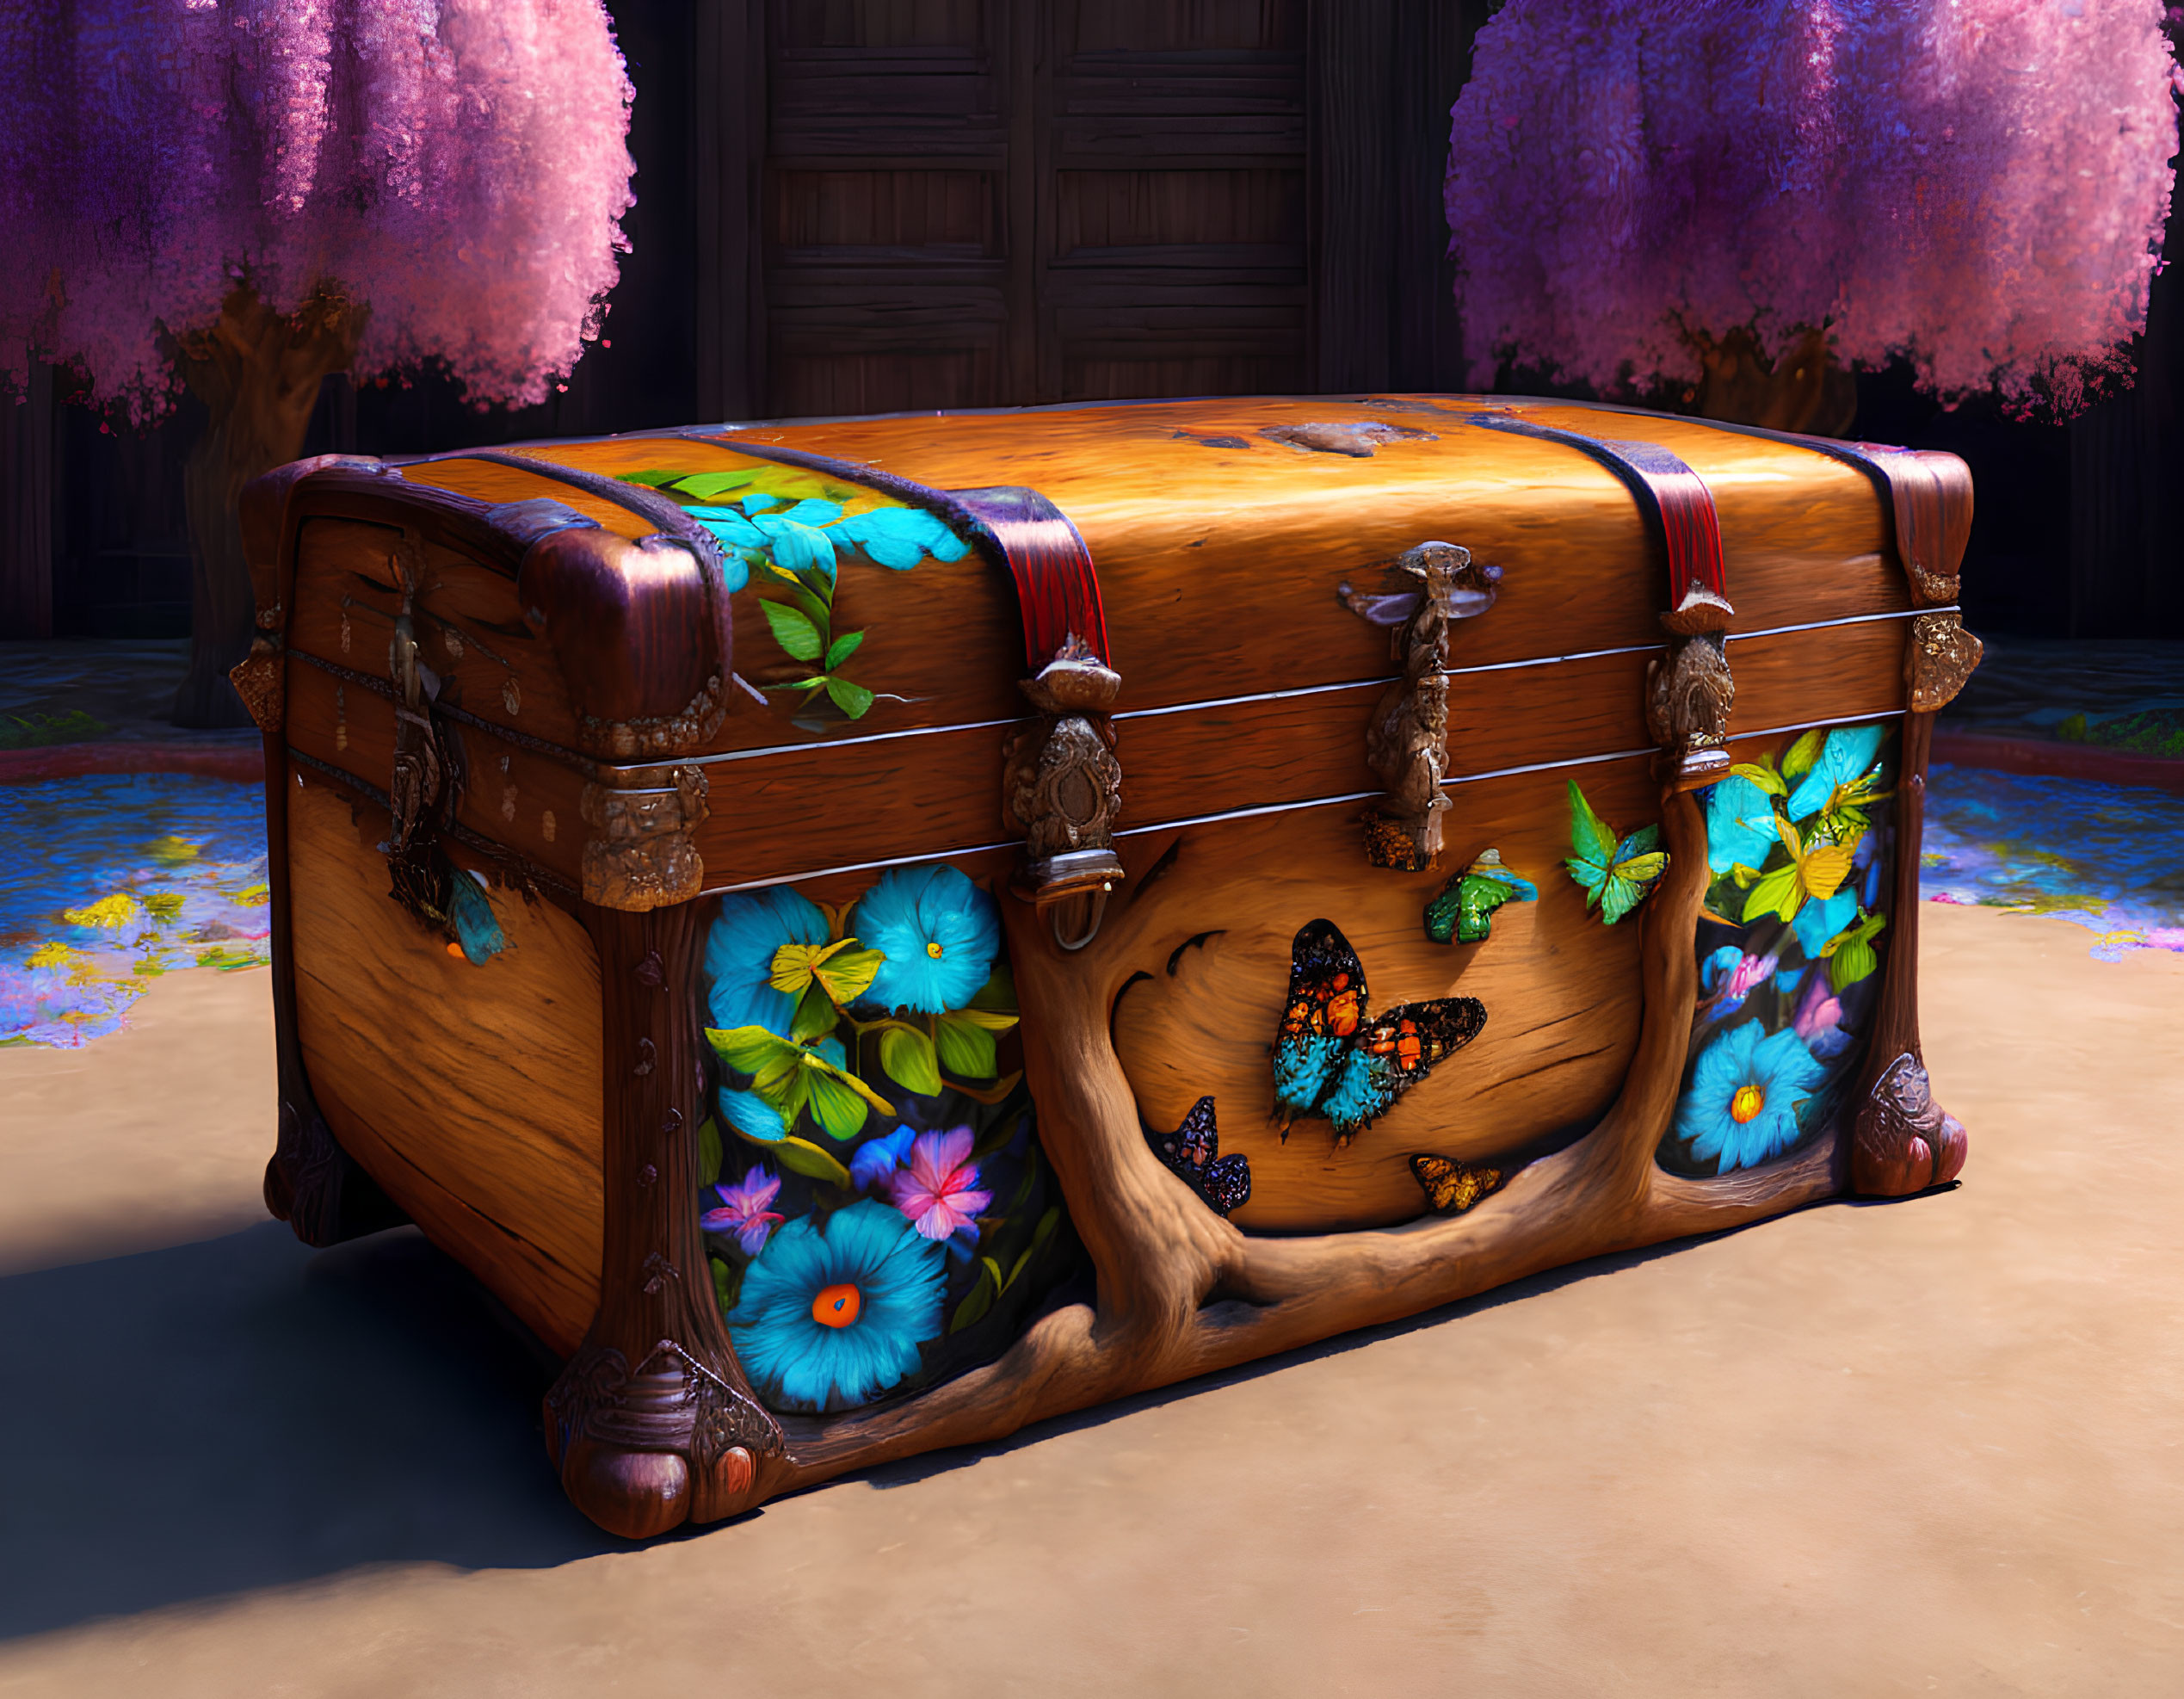 Vintage Wooden Chest with Flower and Butterfly Motifs under Purple Tree Canopy